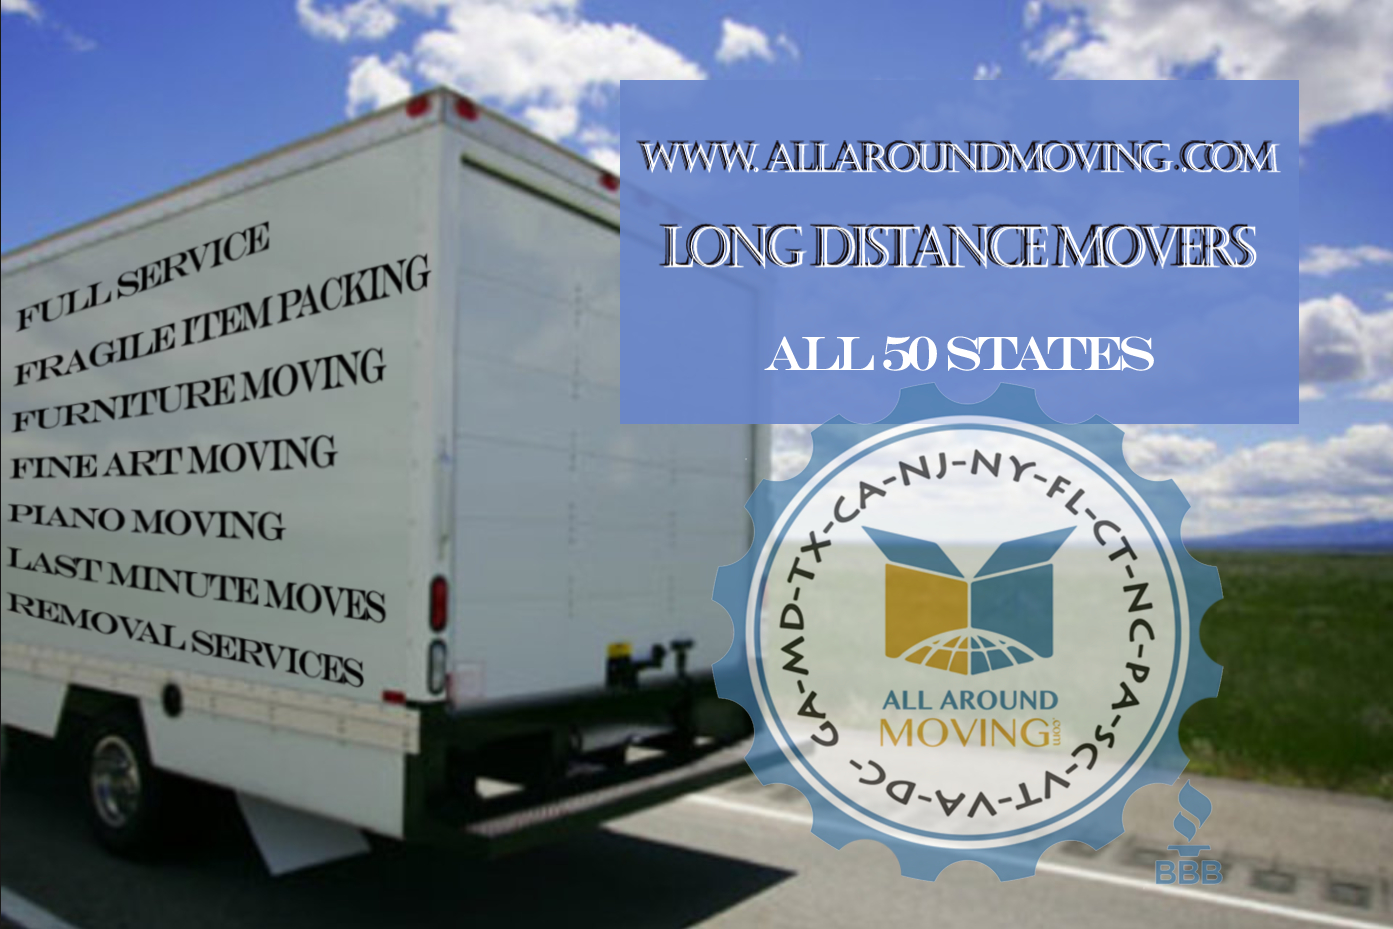 Planning a big long distance move? Contact us today! www.allaroundmoving.com We offer packing services, piano movers, last minute moves, and professional fine art movers!  movers  longdistance  moving  furniture